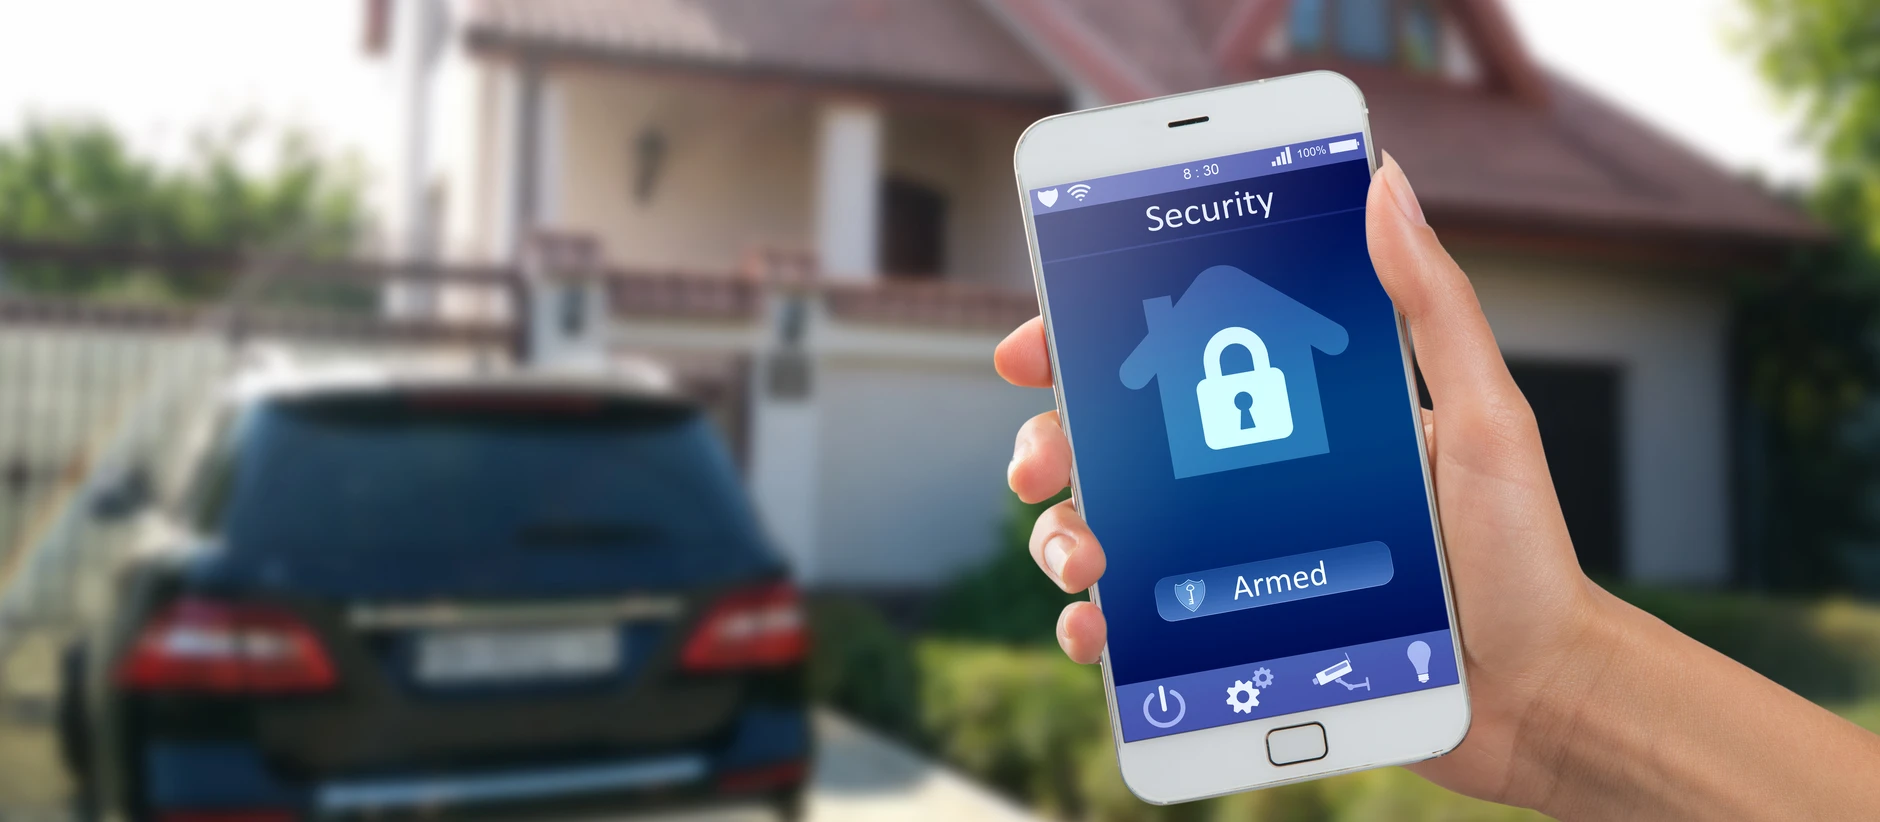 6 Home Security Tips